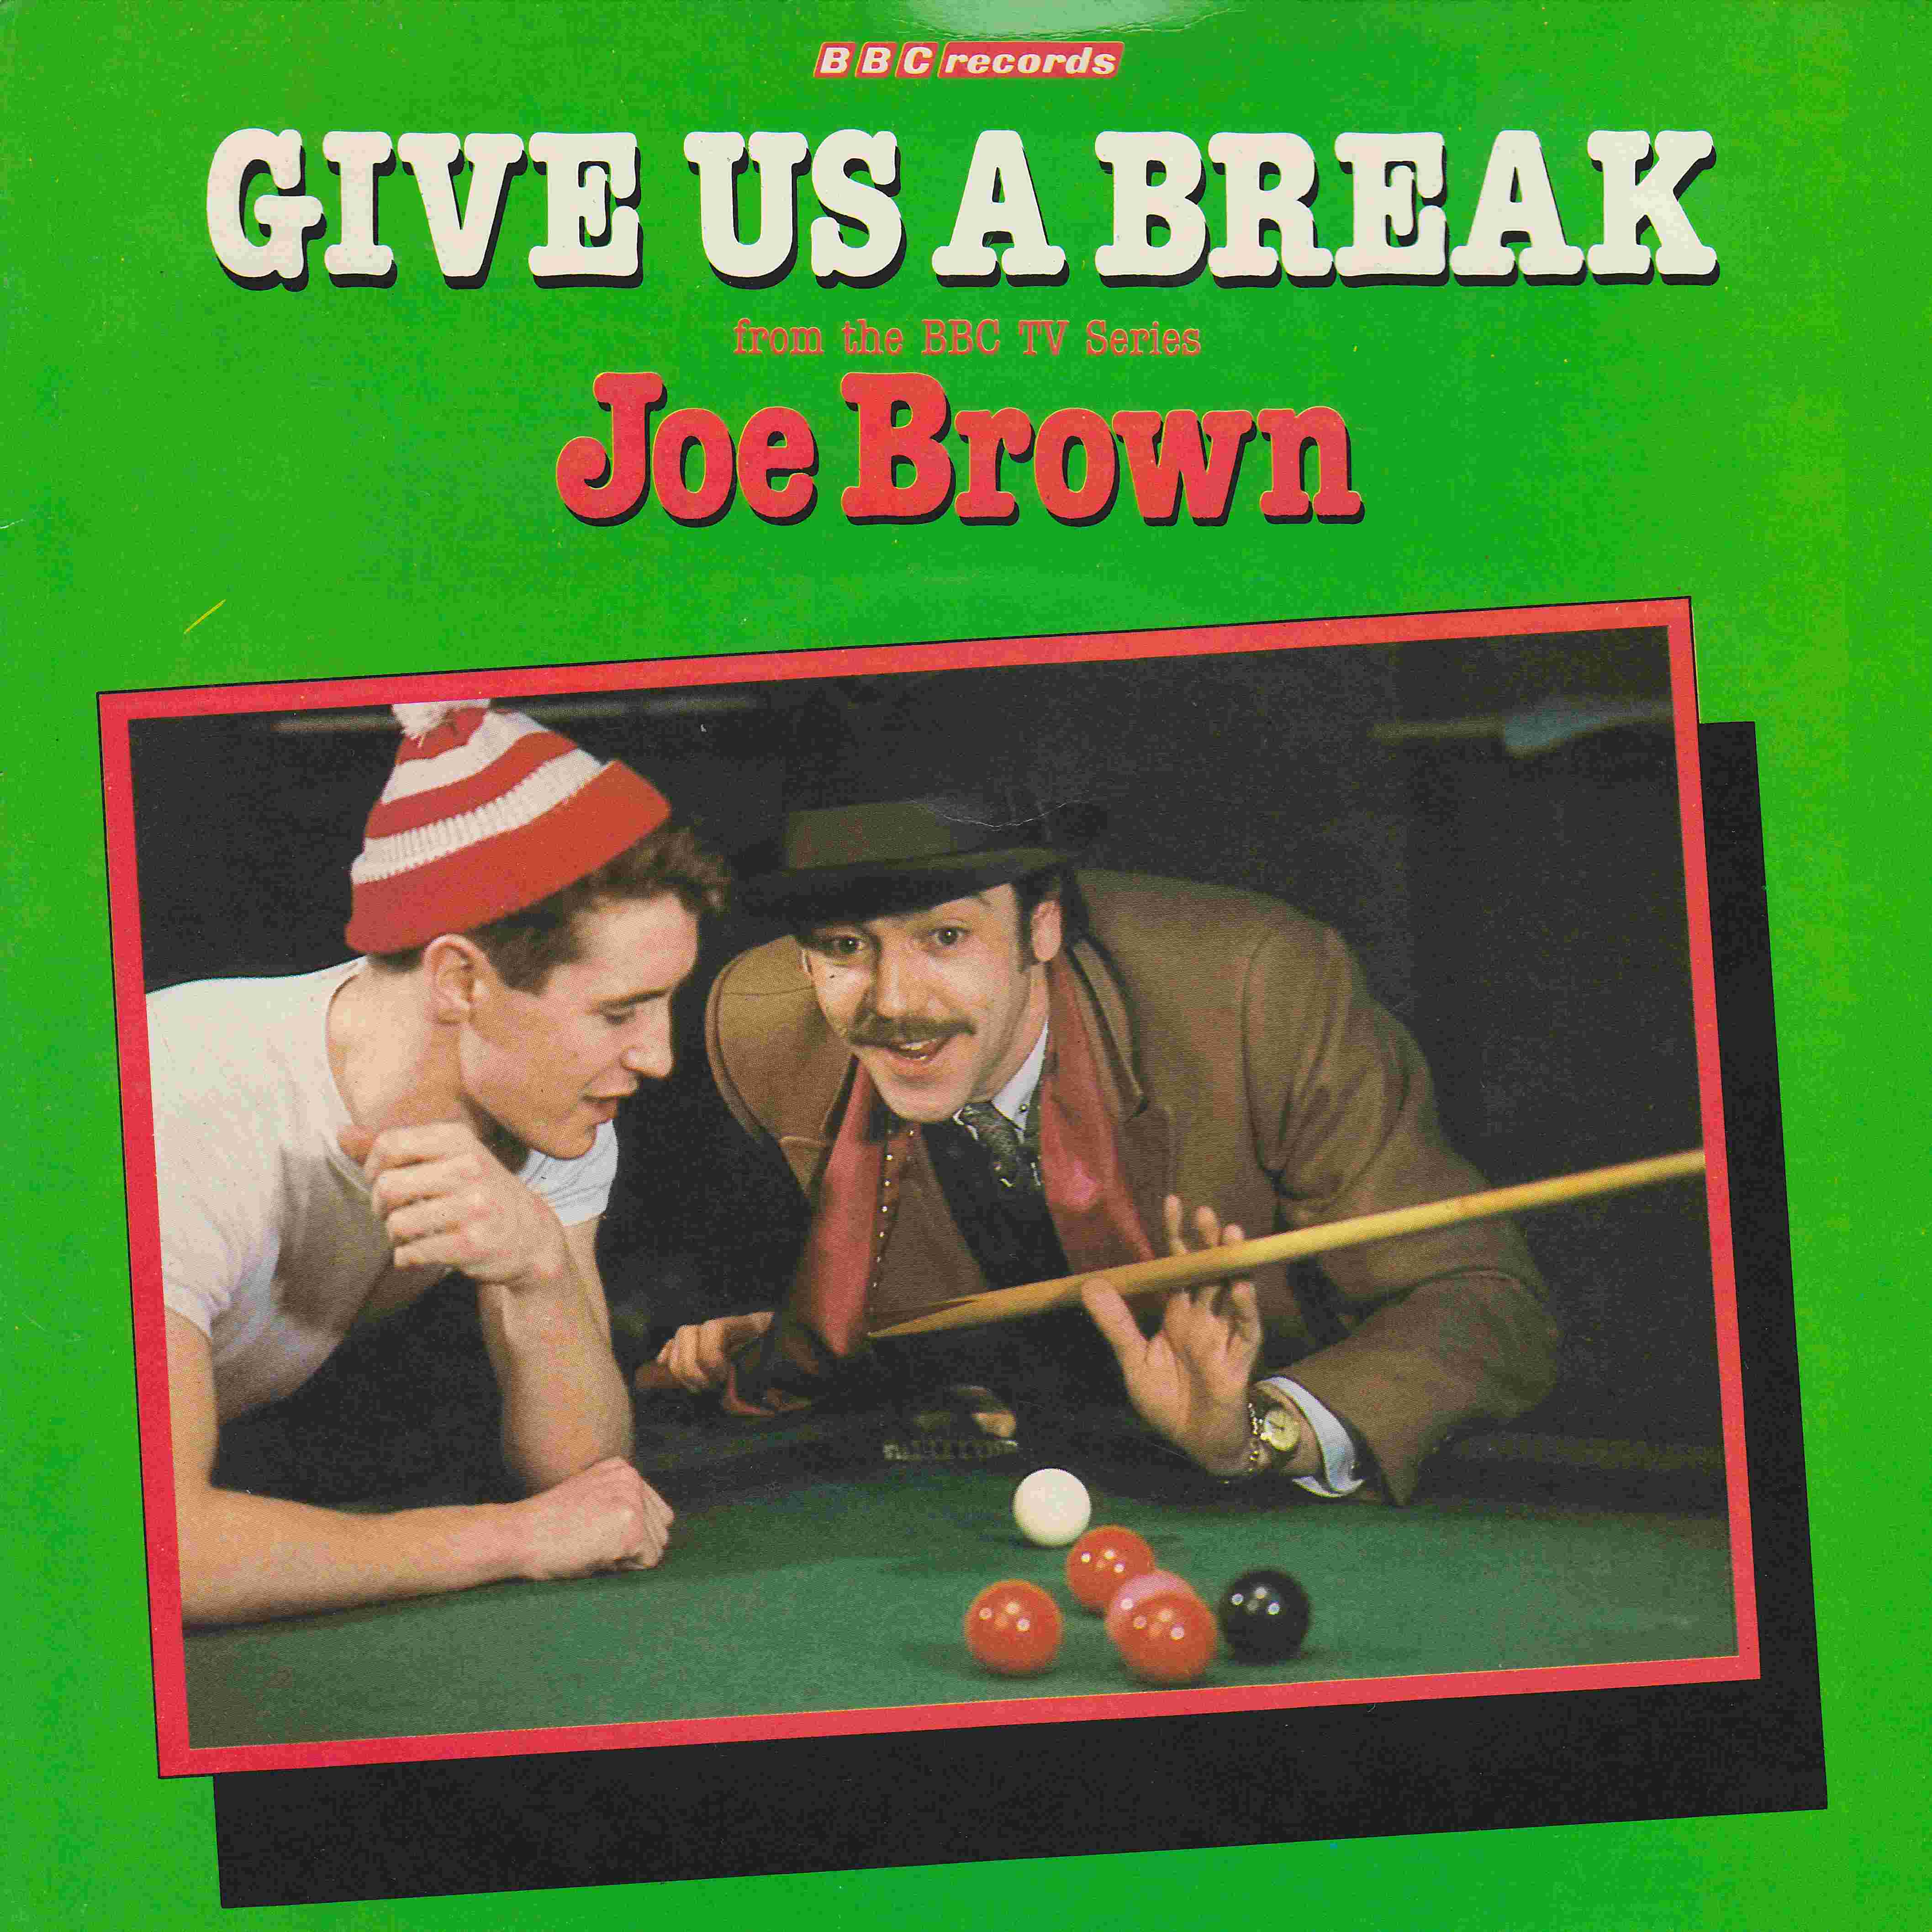 Picture of RESL 134 Give us a break single by artist Joe Brown / Harry South / Leventon from the BBC records and Tapes library